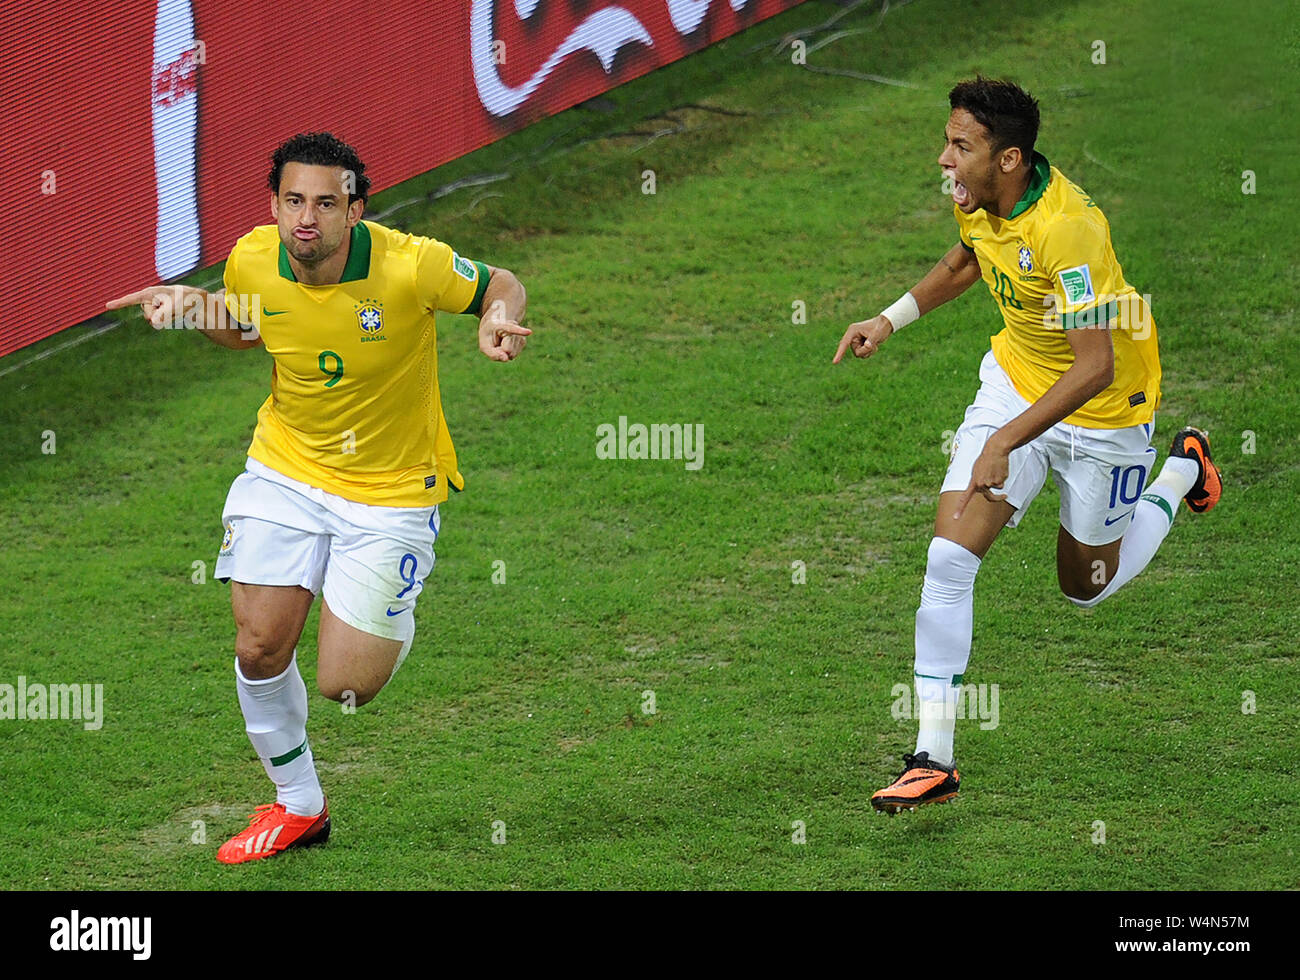 The soccer players of the Brazilian team, Fred and Neymar, celebrating the goal during the game Brazil vs. Spain in the final of the Confederations Cu Stock Photo